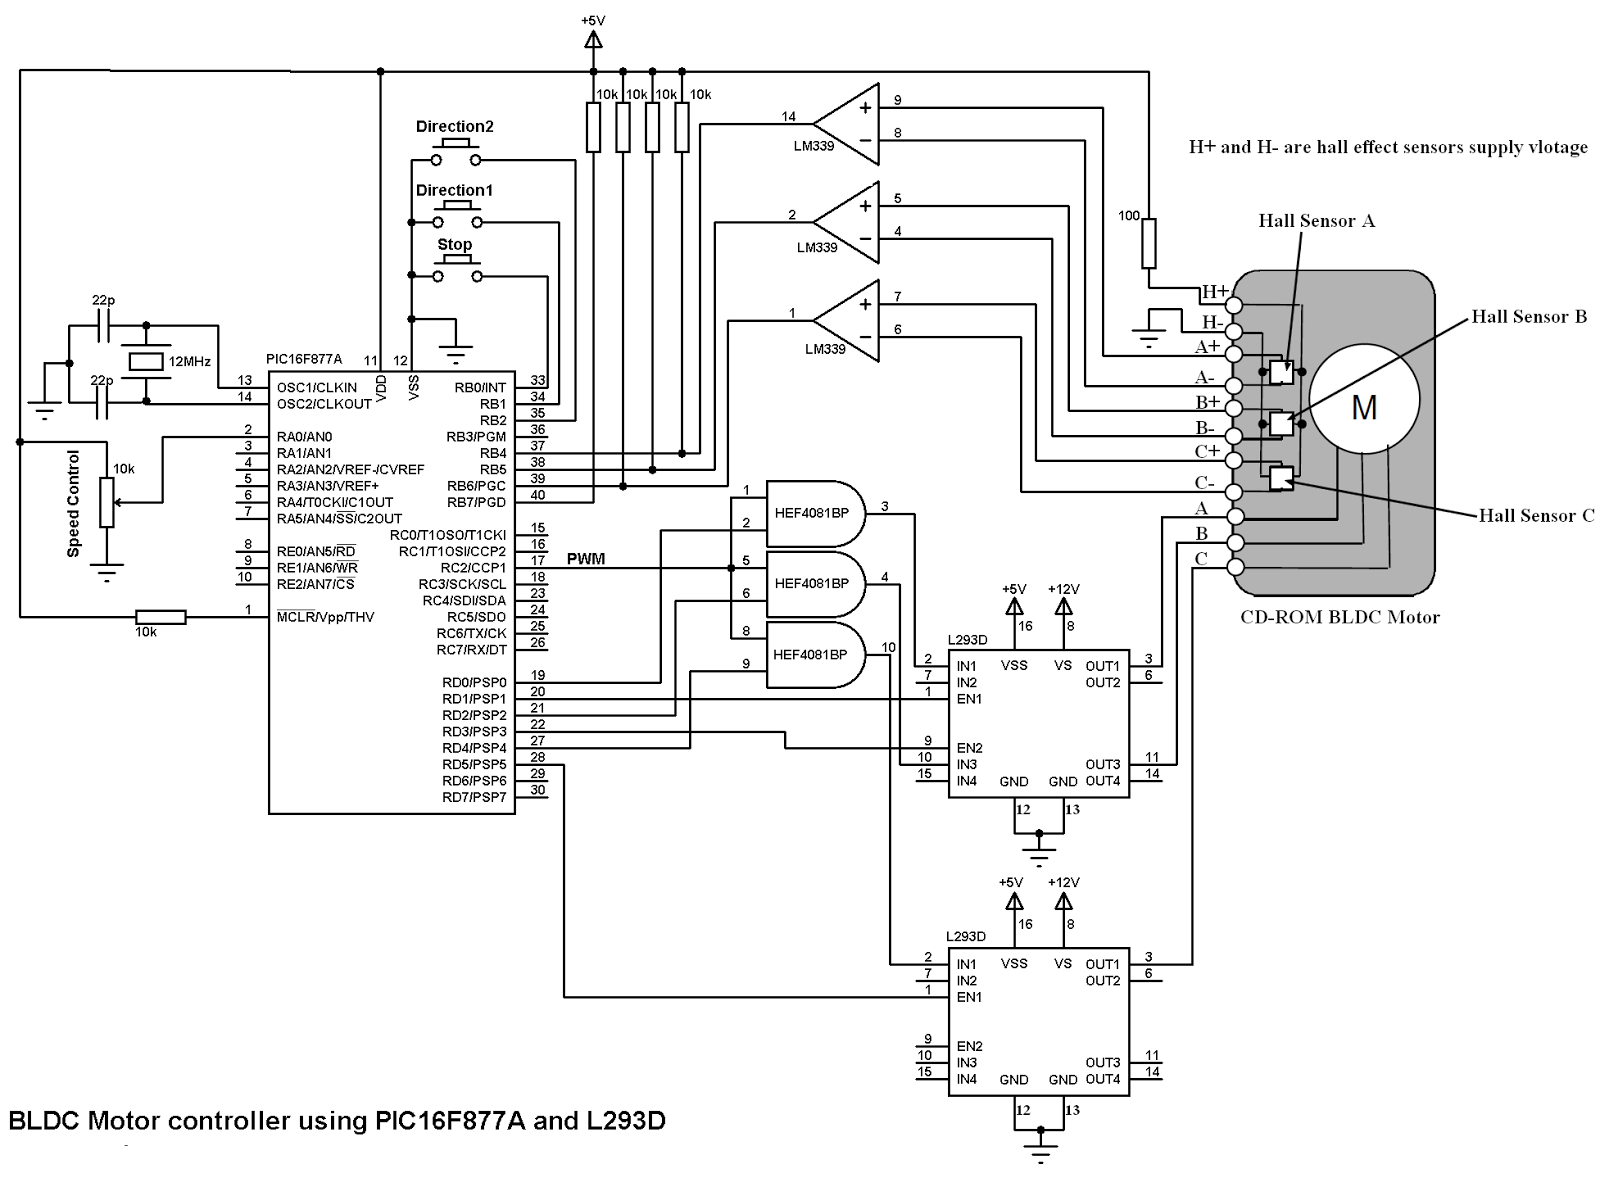 Bldc Motor Control Using Pic16f877a And